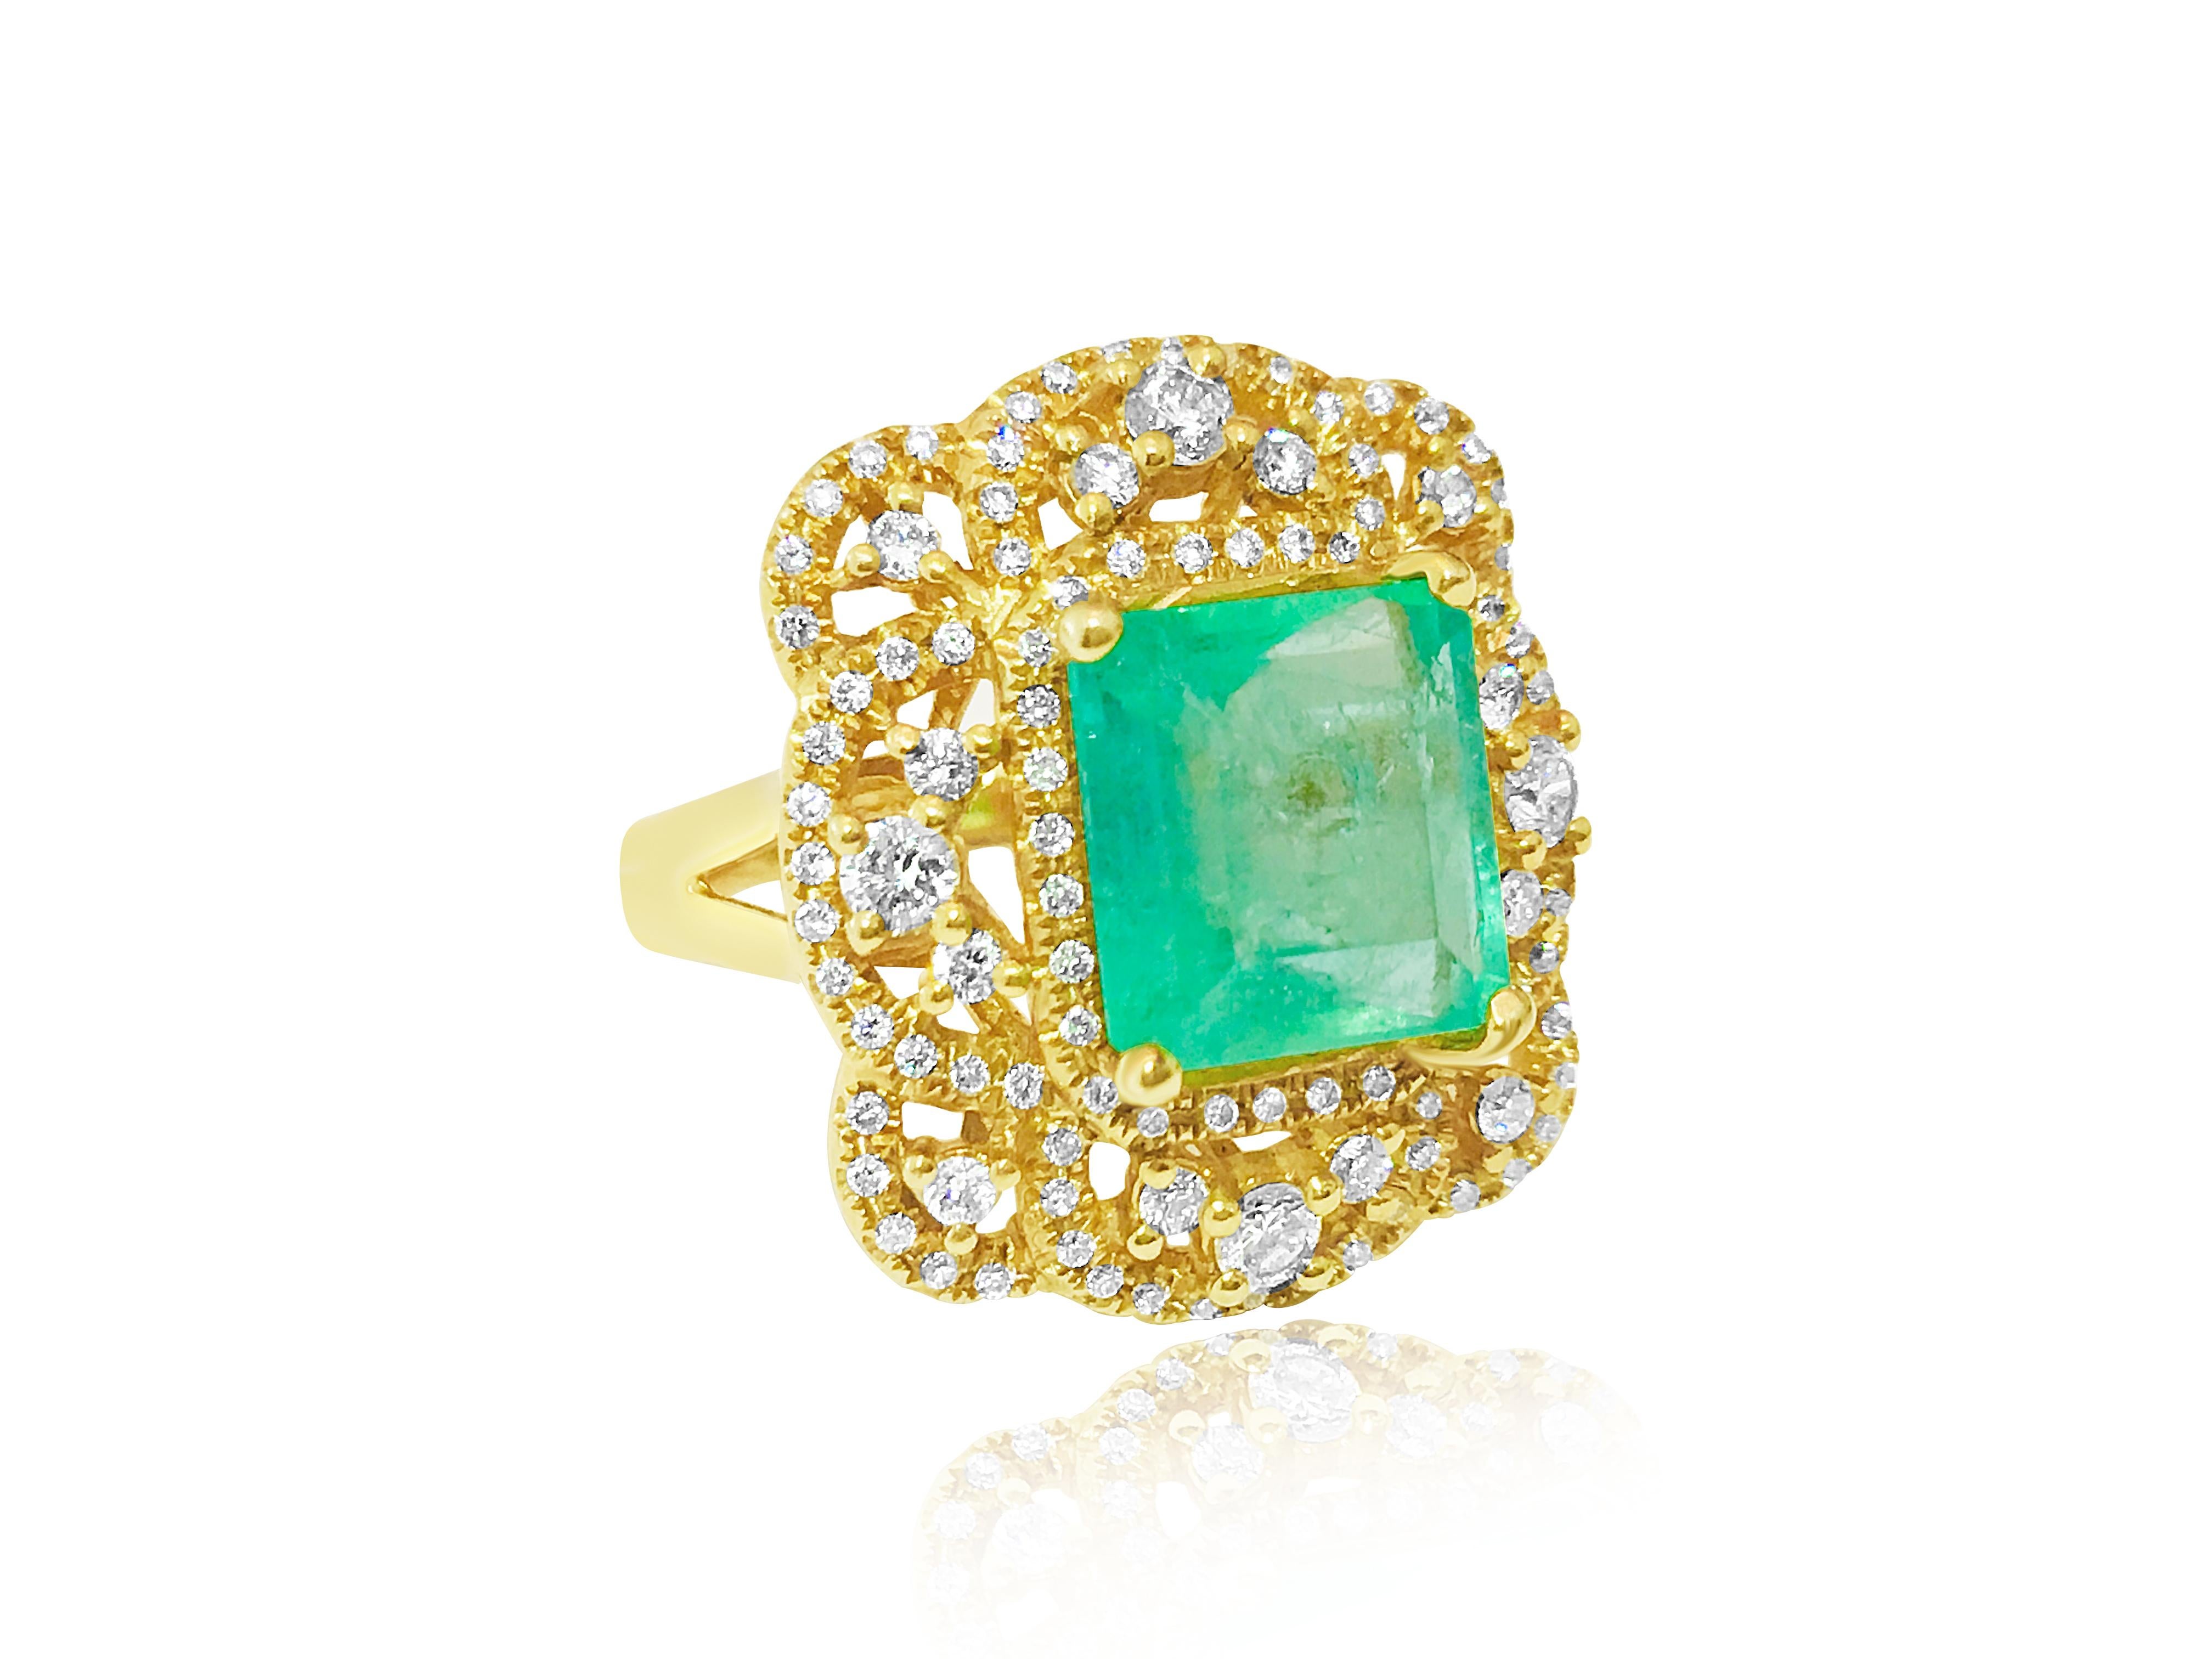 Behold this exquisite 18K yellow gold ring, adorned with a mesmerizing 4.50-carat Colombian emerald, measuring 8.95 x 8.59mm, and showcasing the rich green hue that defines Colombian emeralds. Embracing the emerald are 1.50 carats of diamonds,